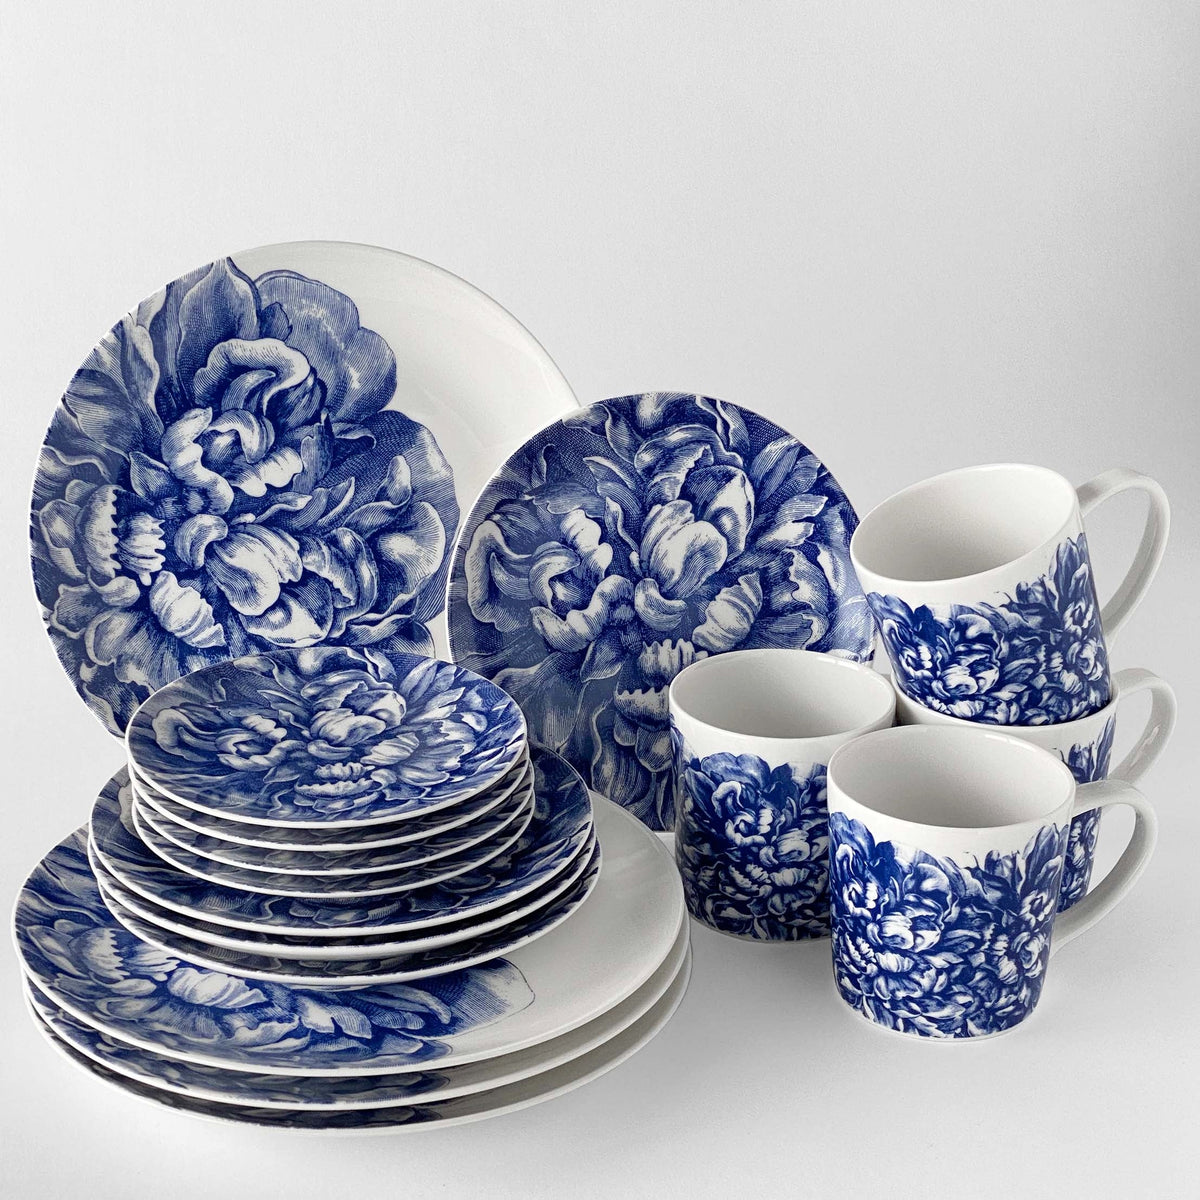 A set of Caskata Artisanal Home premium porcelain dinnerware, including Peony Coupe Dinner Plates and mugs, features a blue and white floral pattern displayed against a light background.